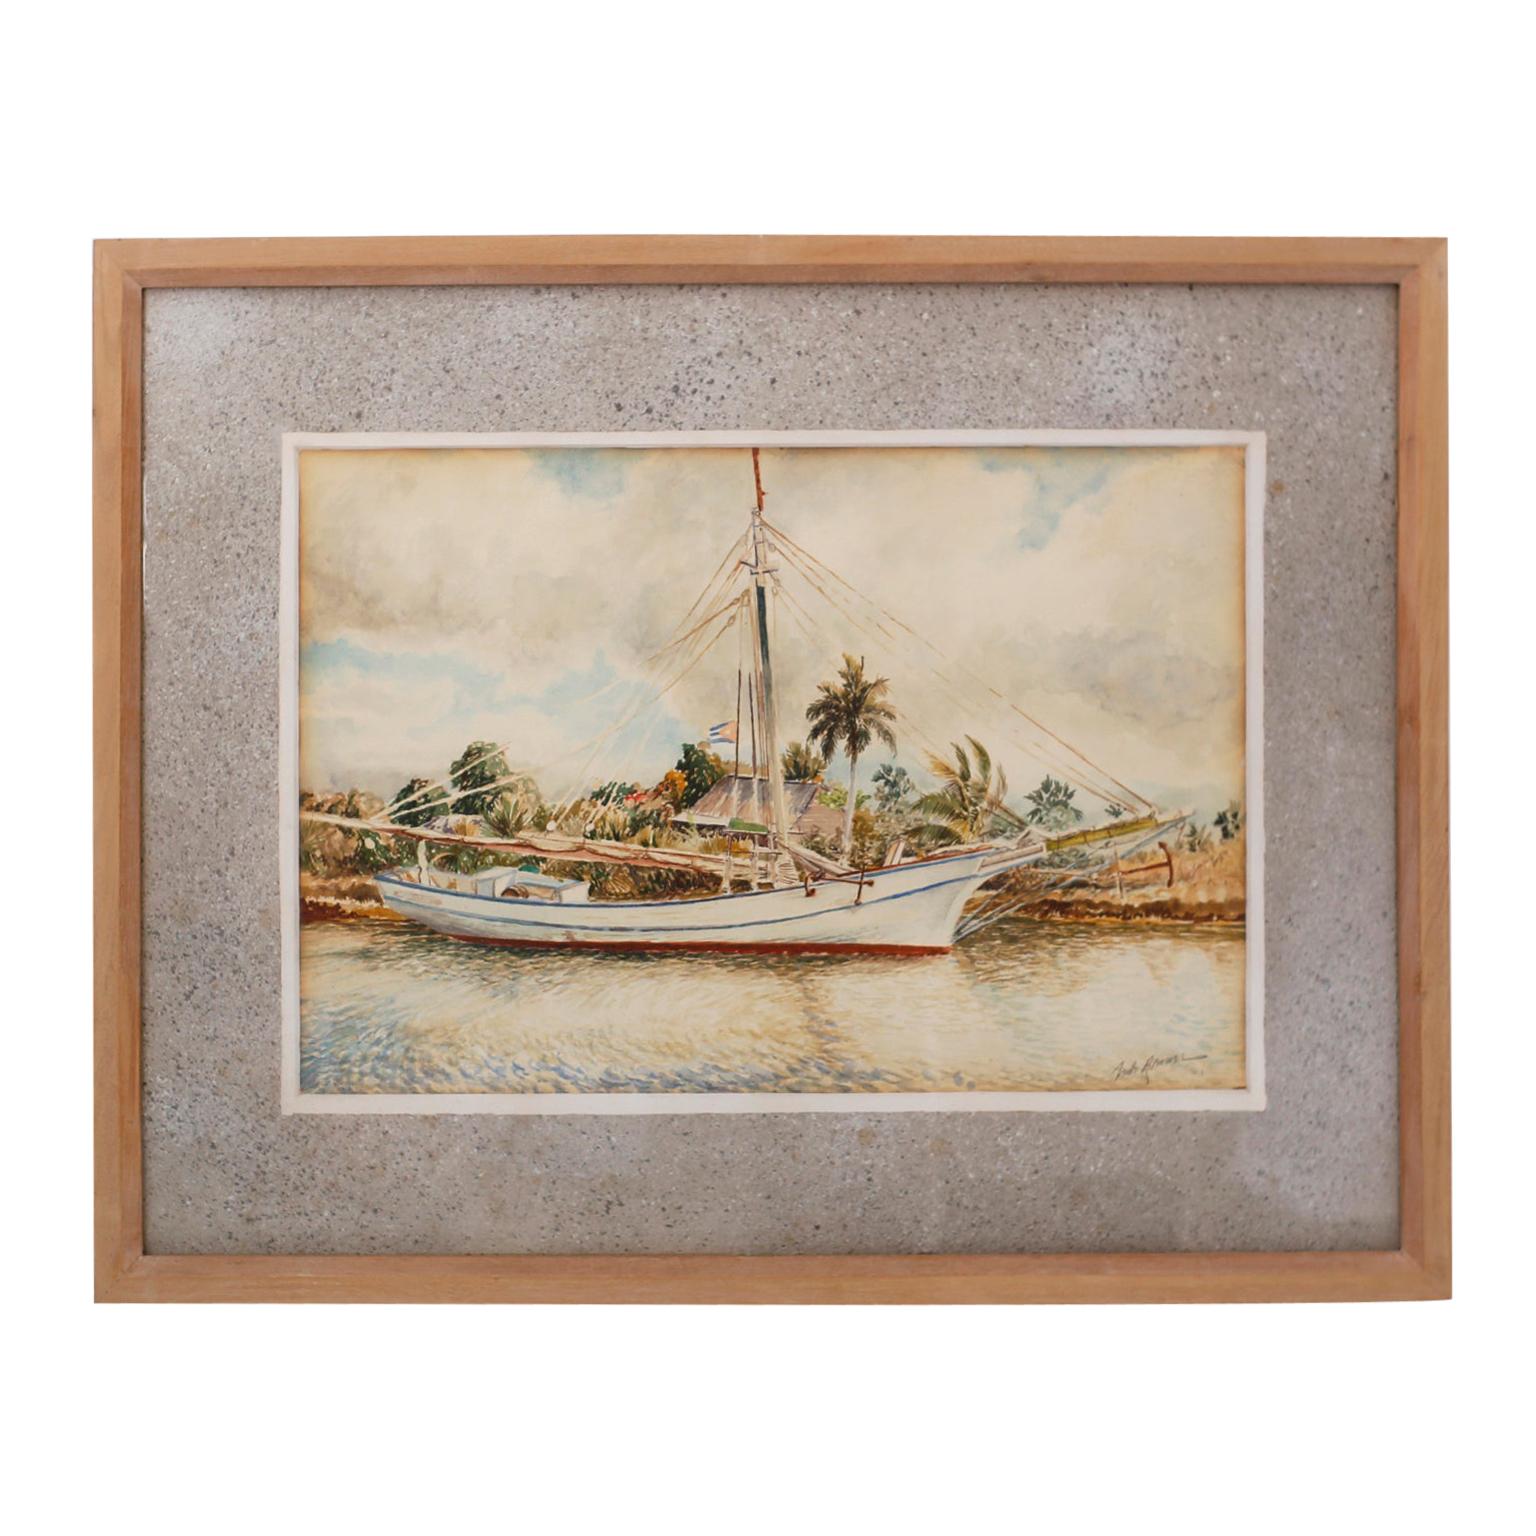 Framed Watercolor on Paper of a Cuban Sailboat For Sale